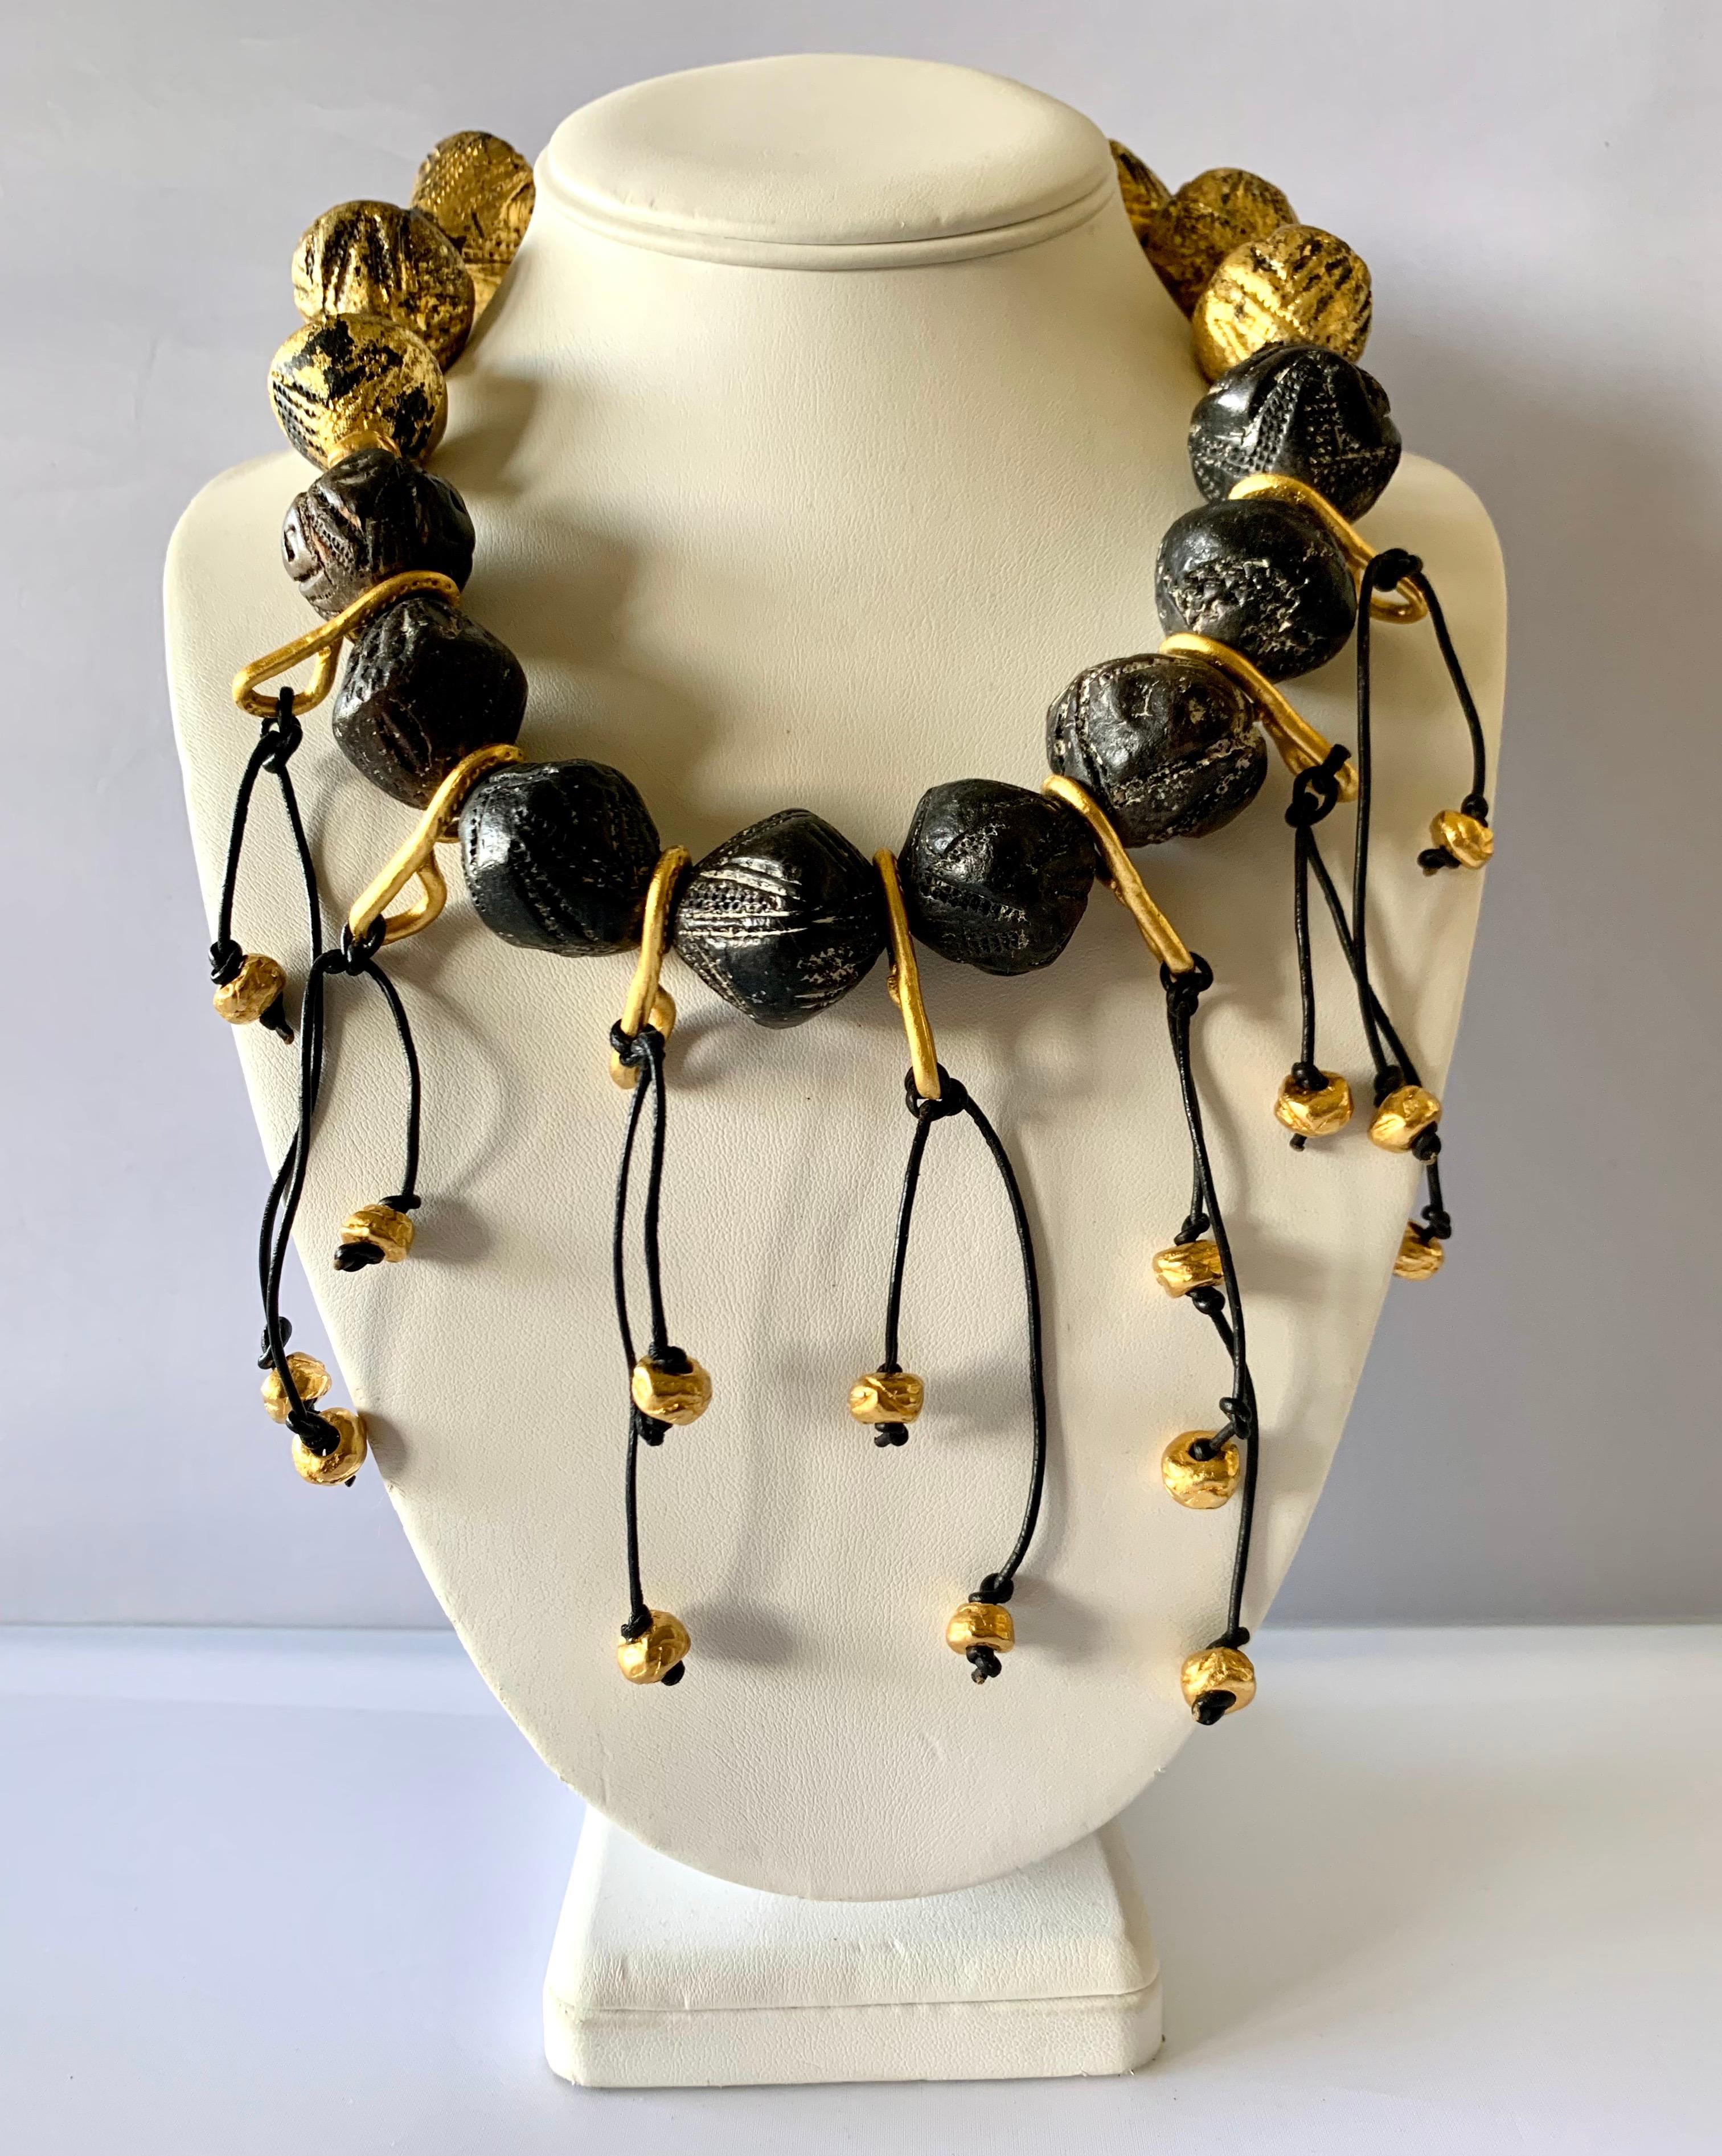 Vintage French oversized statement necklace, comprised out of hand-carved stone beads depicting tribal motifs. Black leather fringe tassels with gold beads give the necklace extra drama -  made in France circa 1980/90 by Pascal.